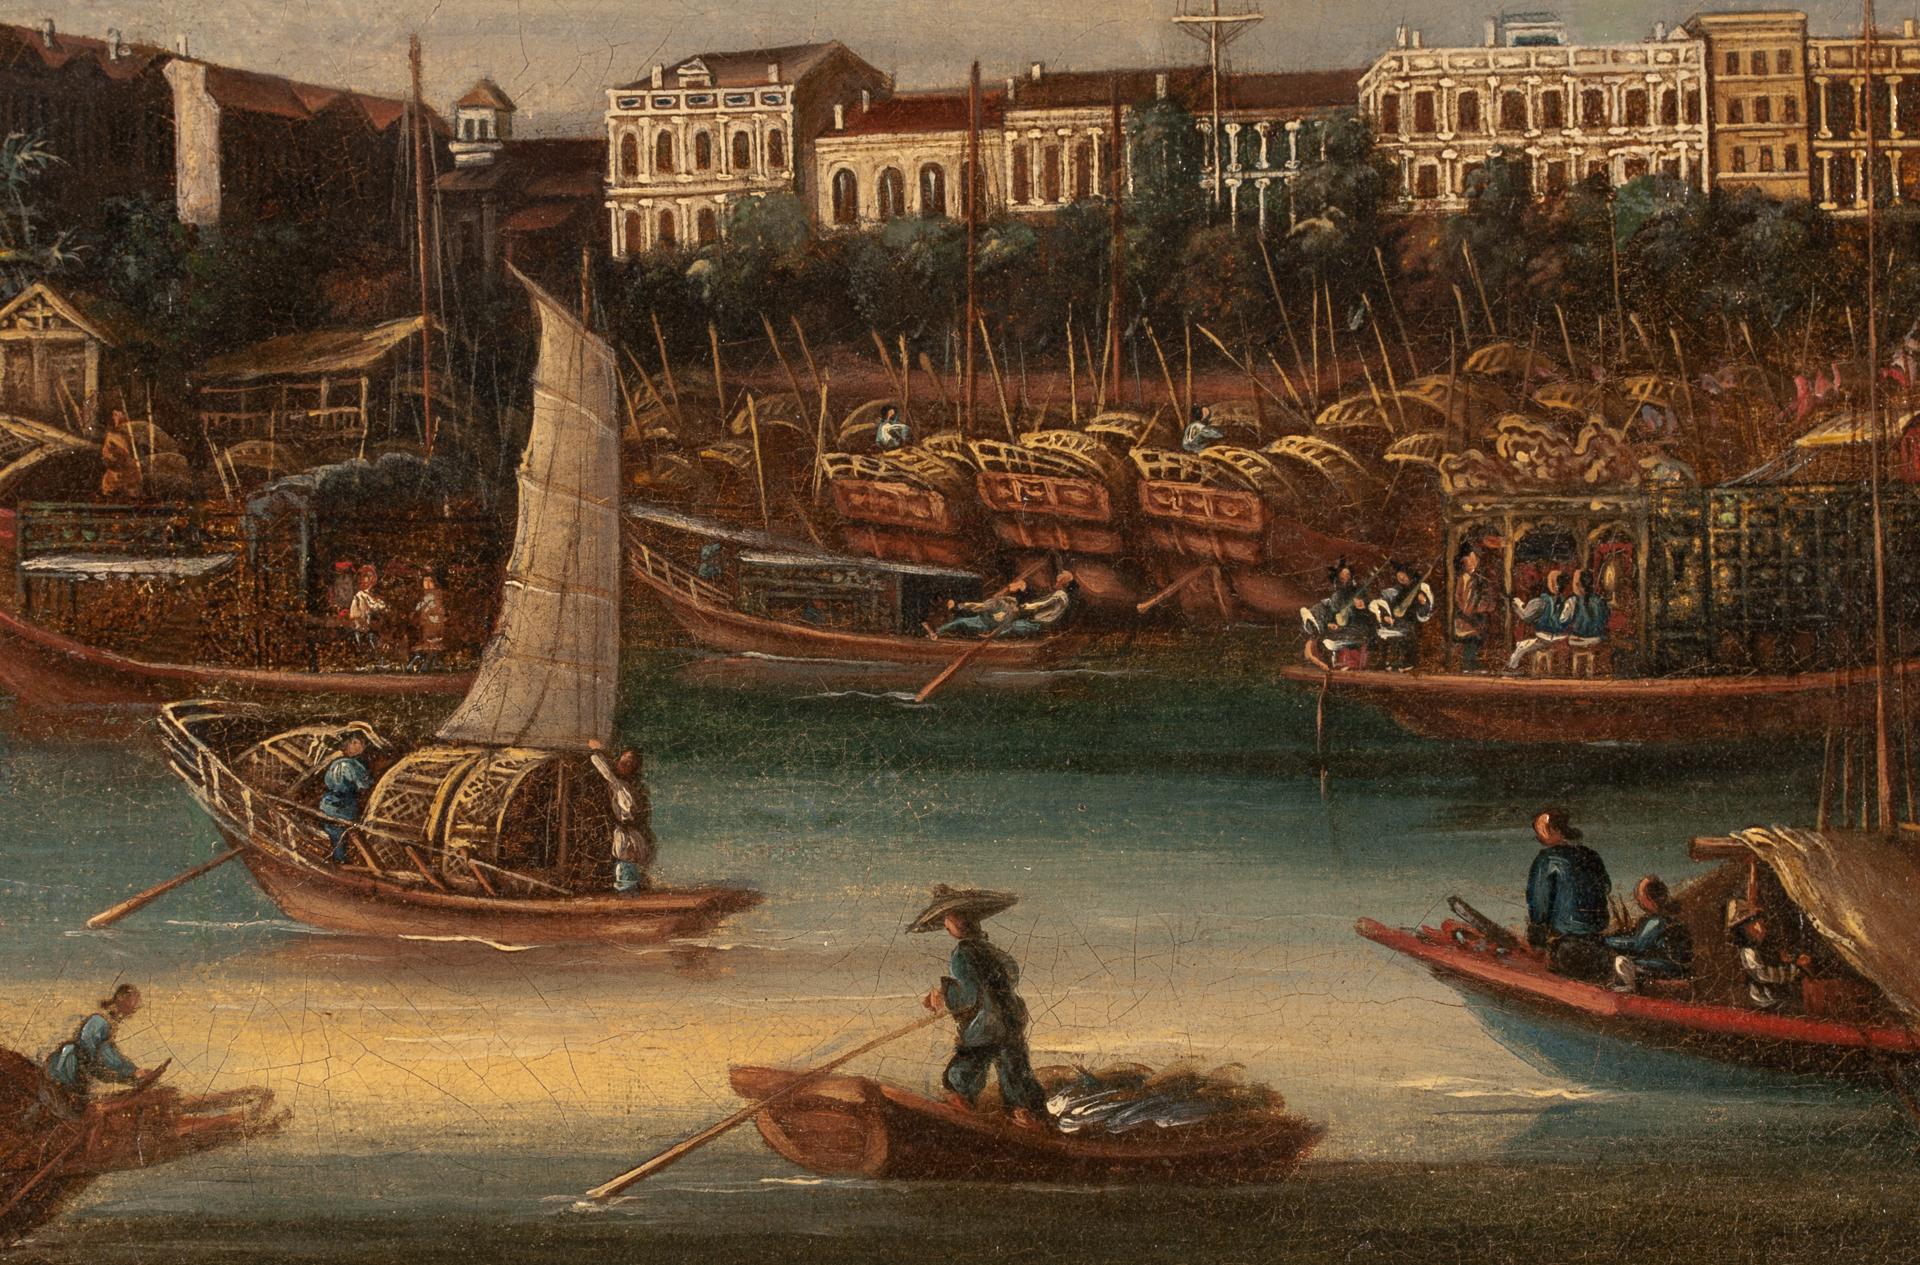 Sought by collectors worldwide, art and artifacts showing an early western presence in the Orient boomed with the opening of the China Trade by way of the sailing ship. The surviving paintings which capture the important Chinese harbors of the 18th